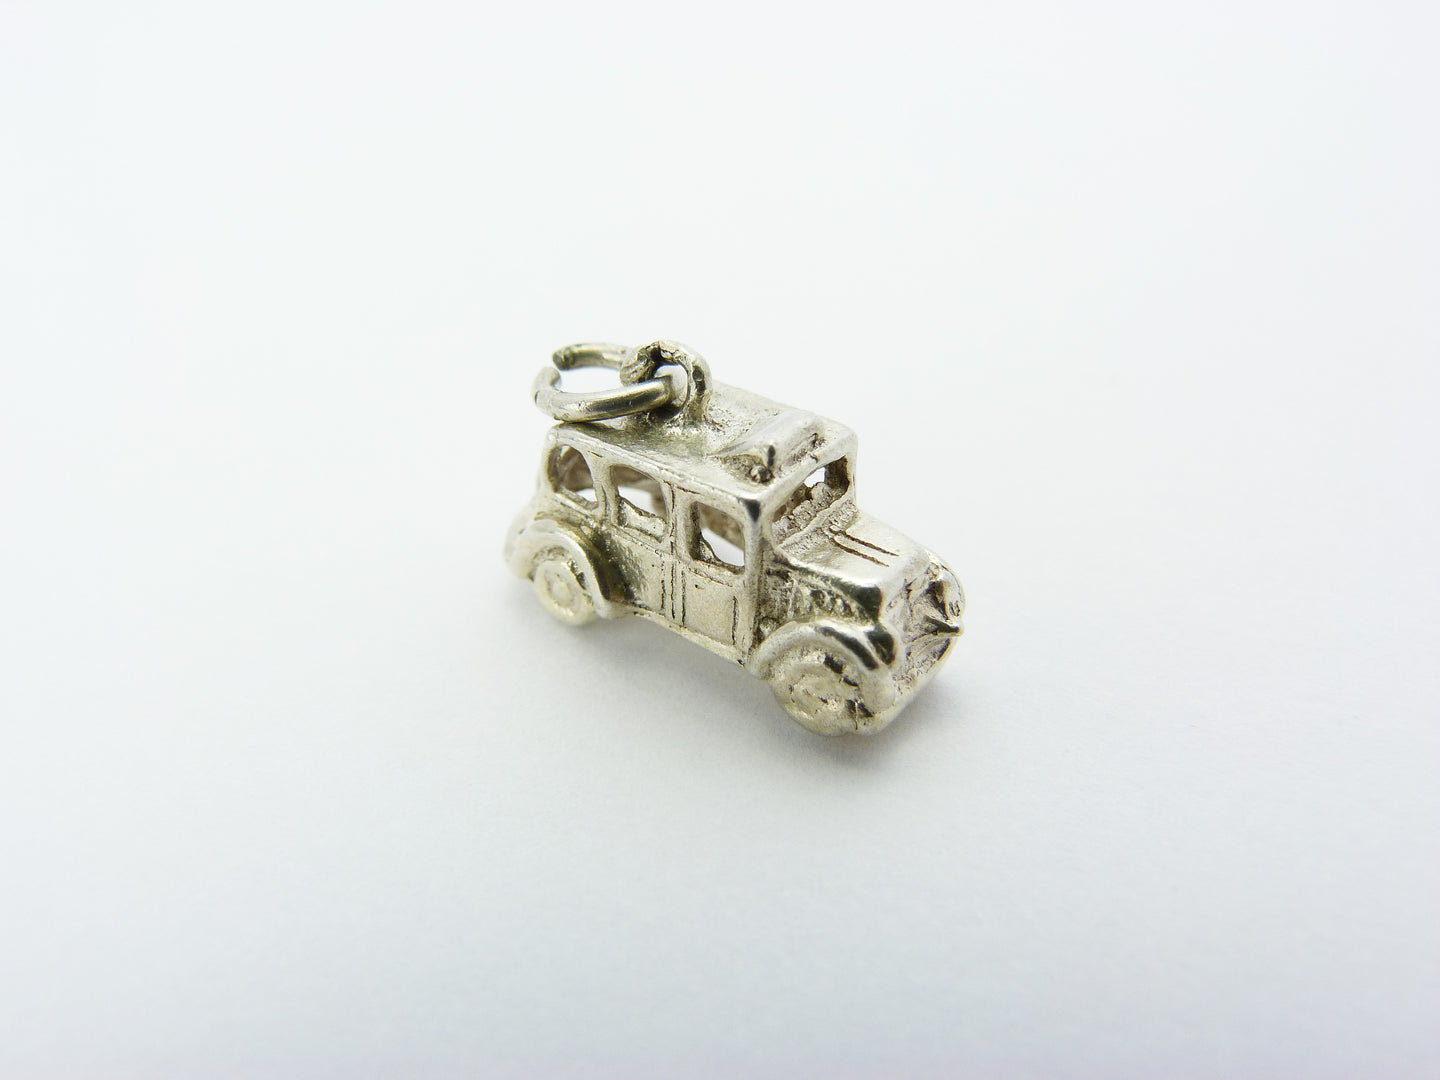 Vintage London Cab Taxi Hackney Carriage Silver Charm